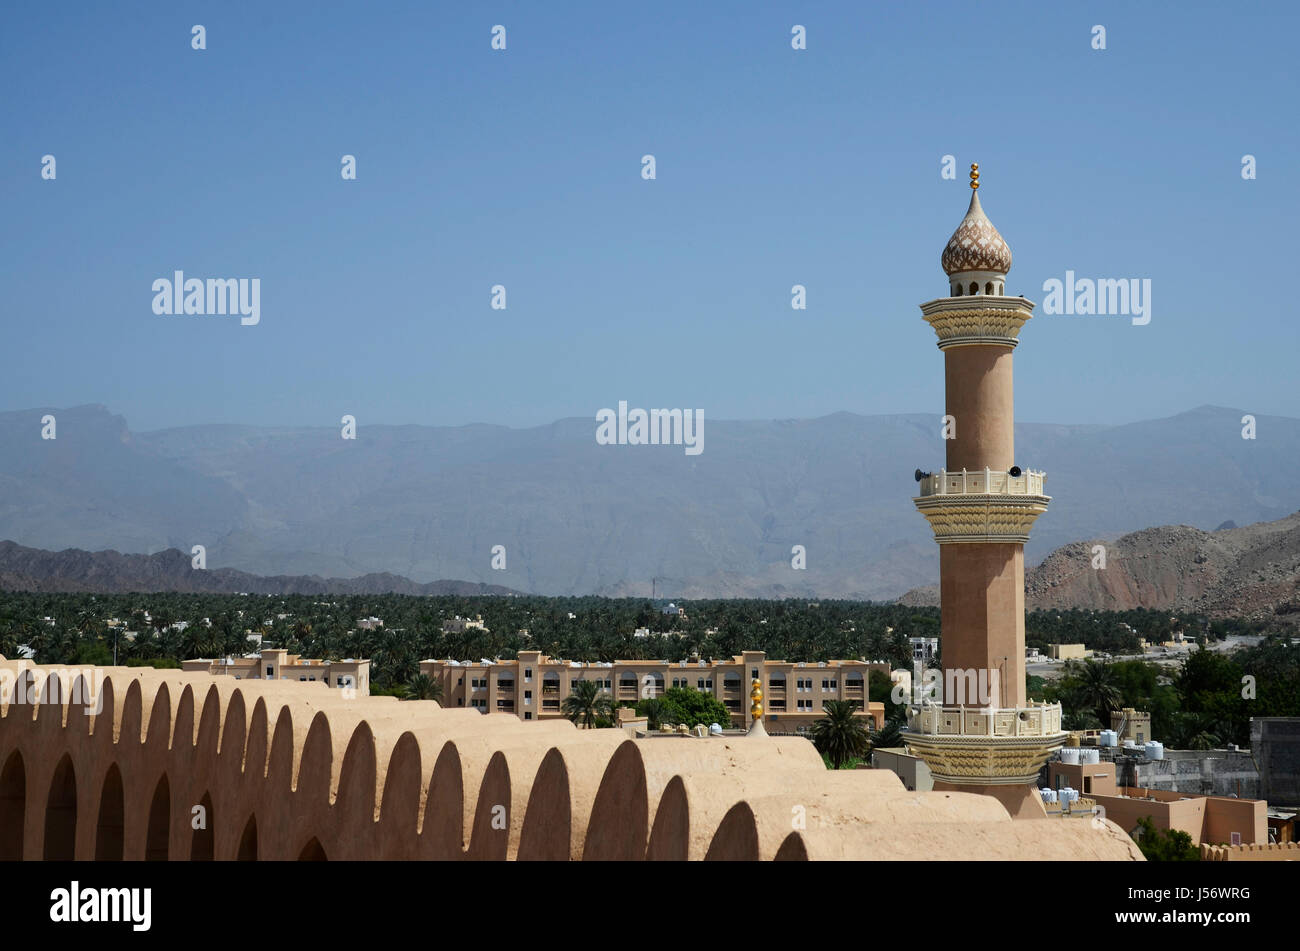 View from the walls of Nizwa Fort at the minaret of a nearby mosque, Nizwa, Sultanate of Oman Stock Photo